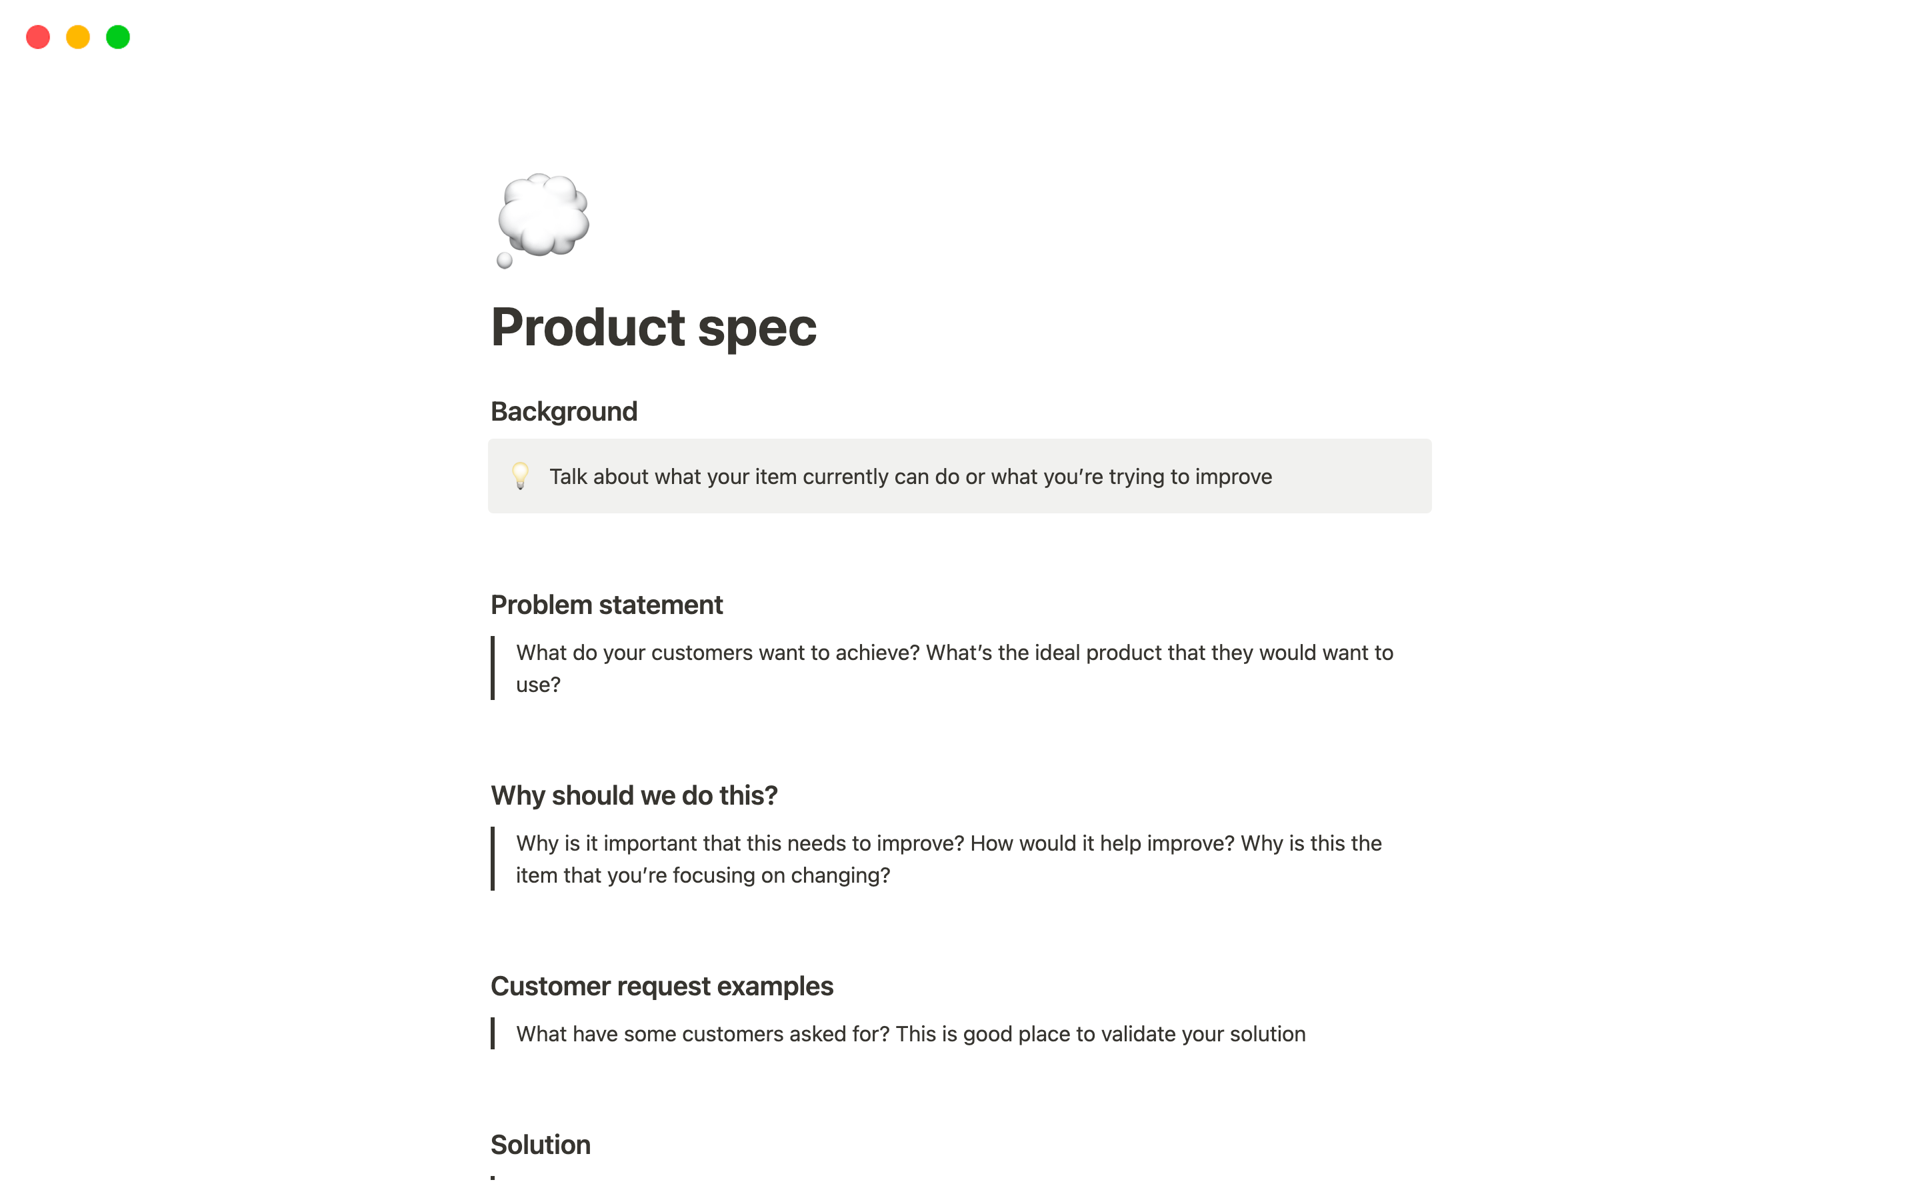 Product spec for product development